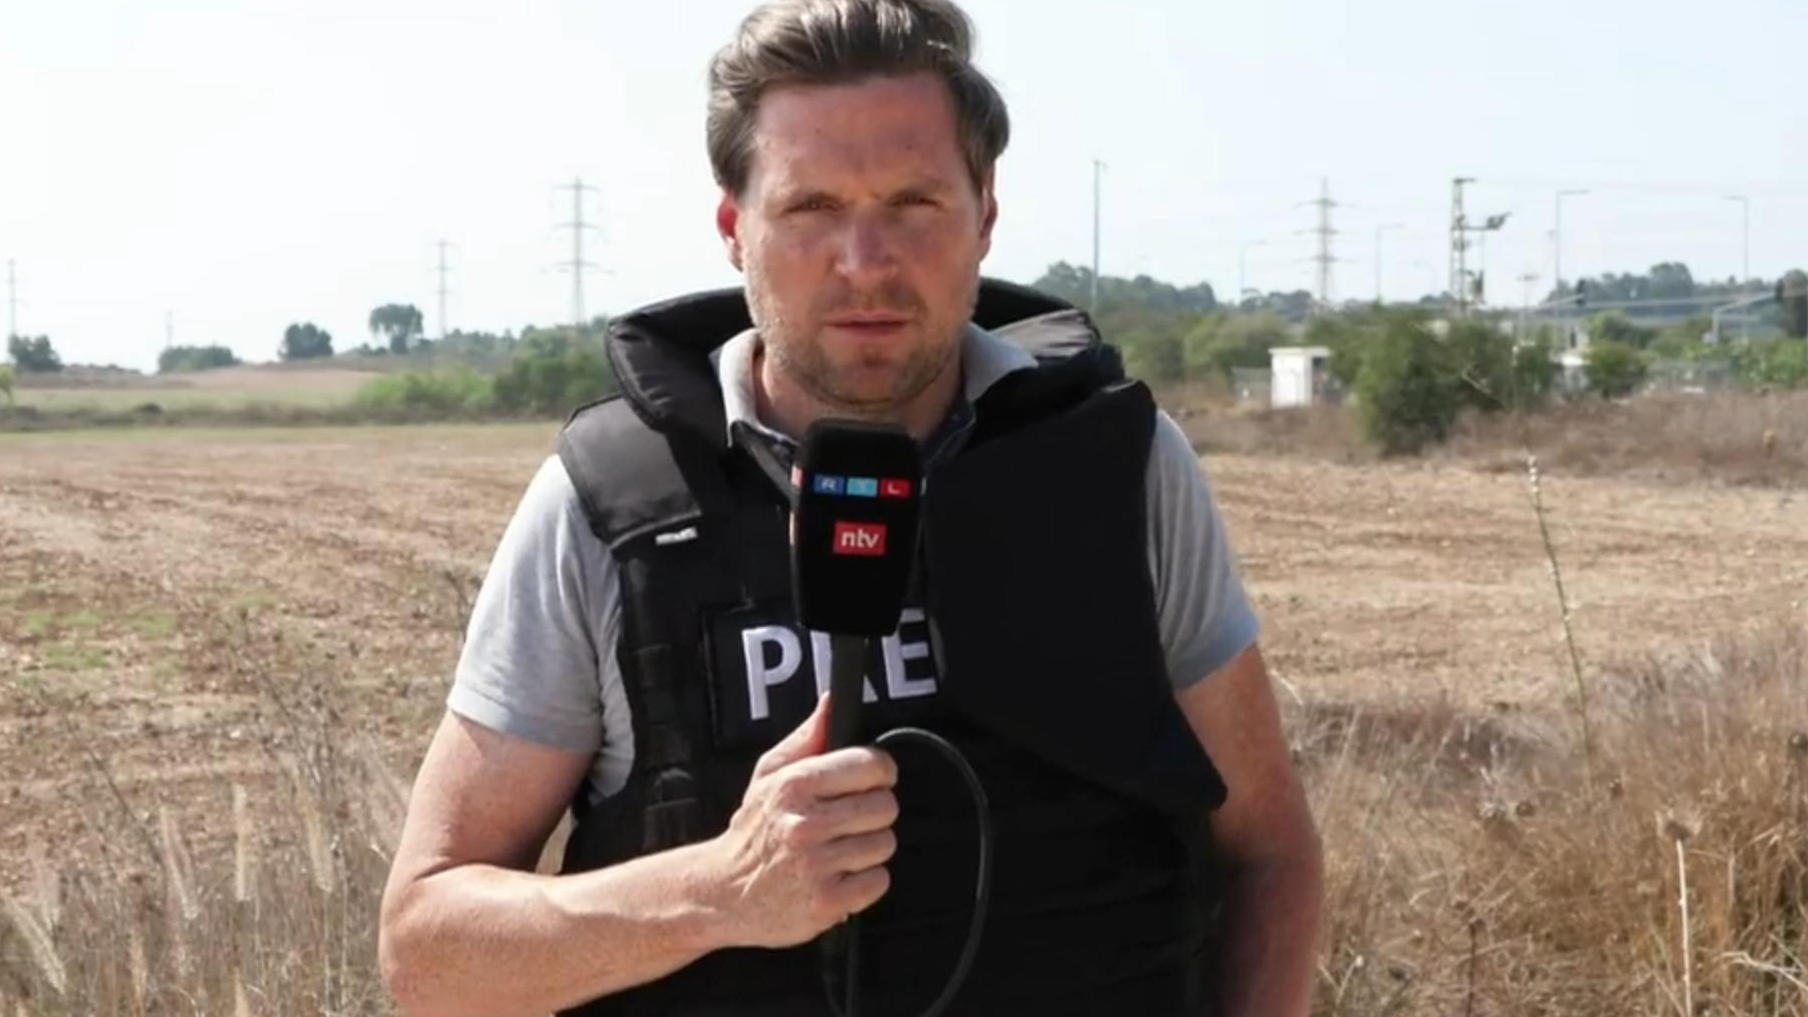 Gaza: "Refugees are probably being held back by Hamas" RTL reporter Gordian Fritz in Sikim, Israel